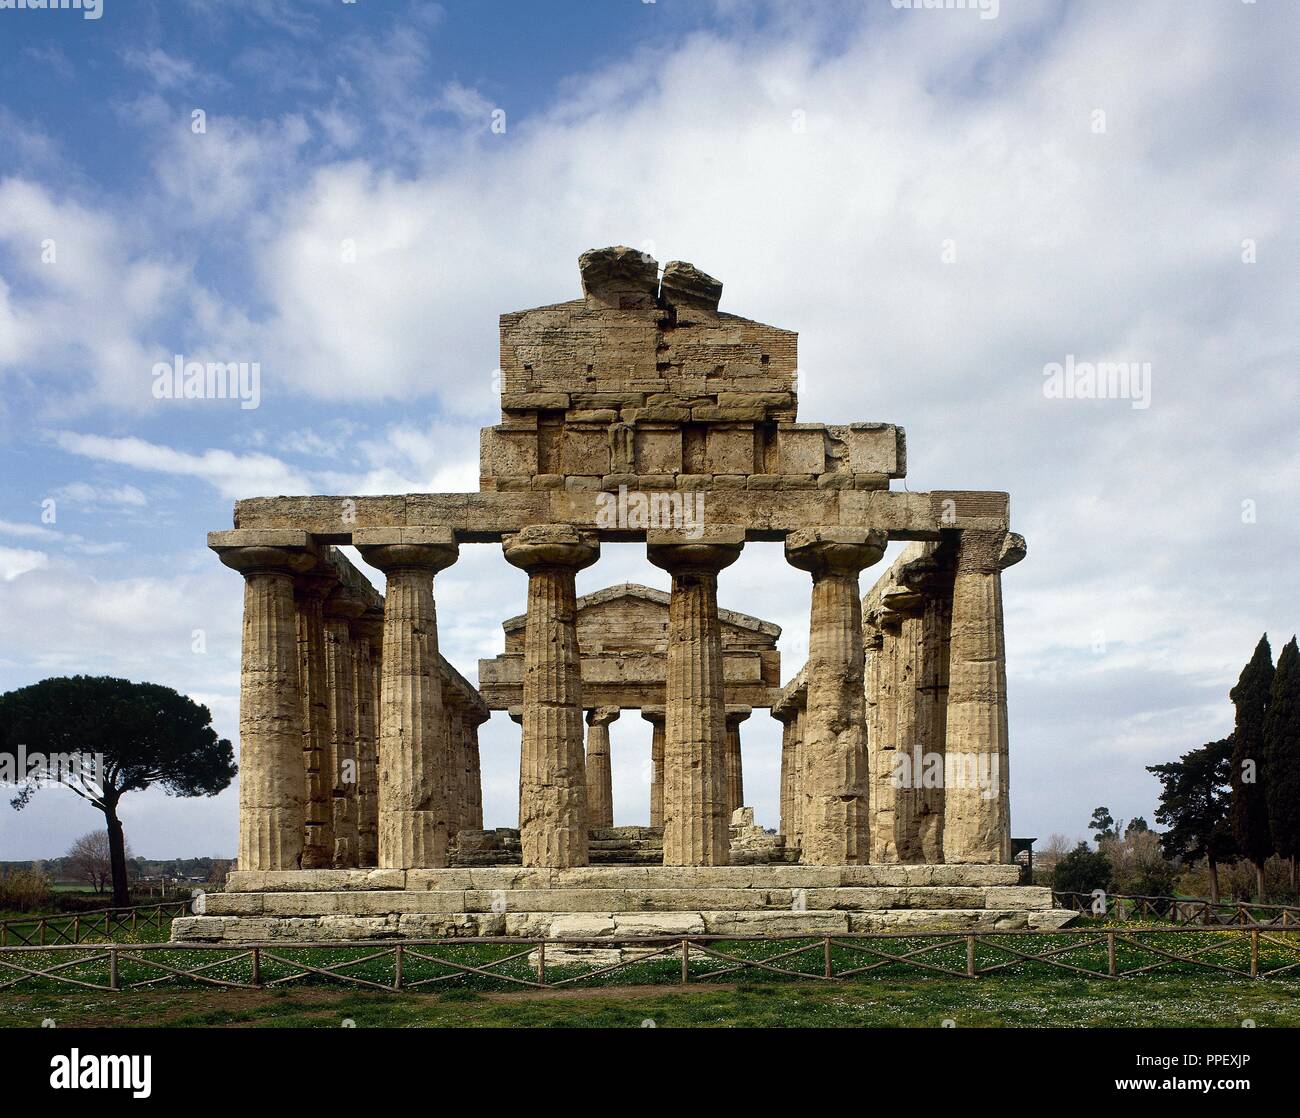 Greek Art. Magna Graecia. Paestum.Temple of Athena. It was built around 500 BC. The architecture is transitional, being partly in the Ionic style and partly early Doric. Facade. Outside. Stock Photo